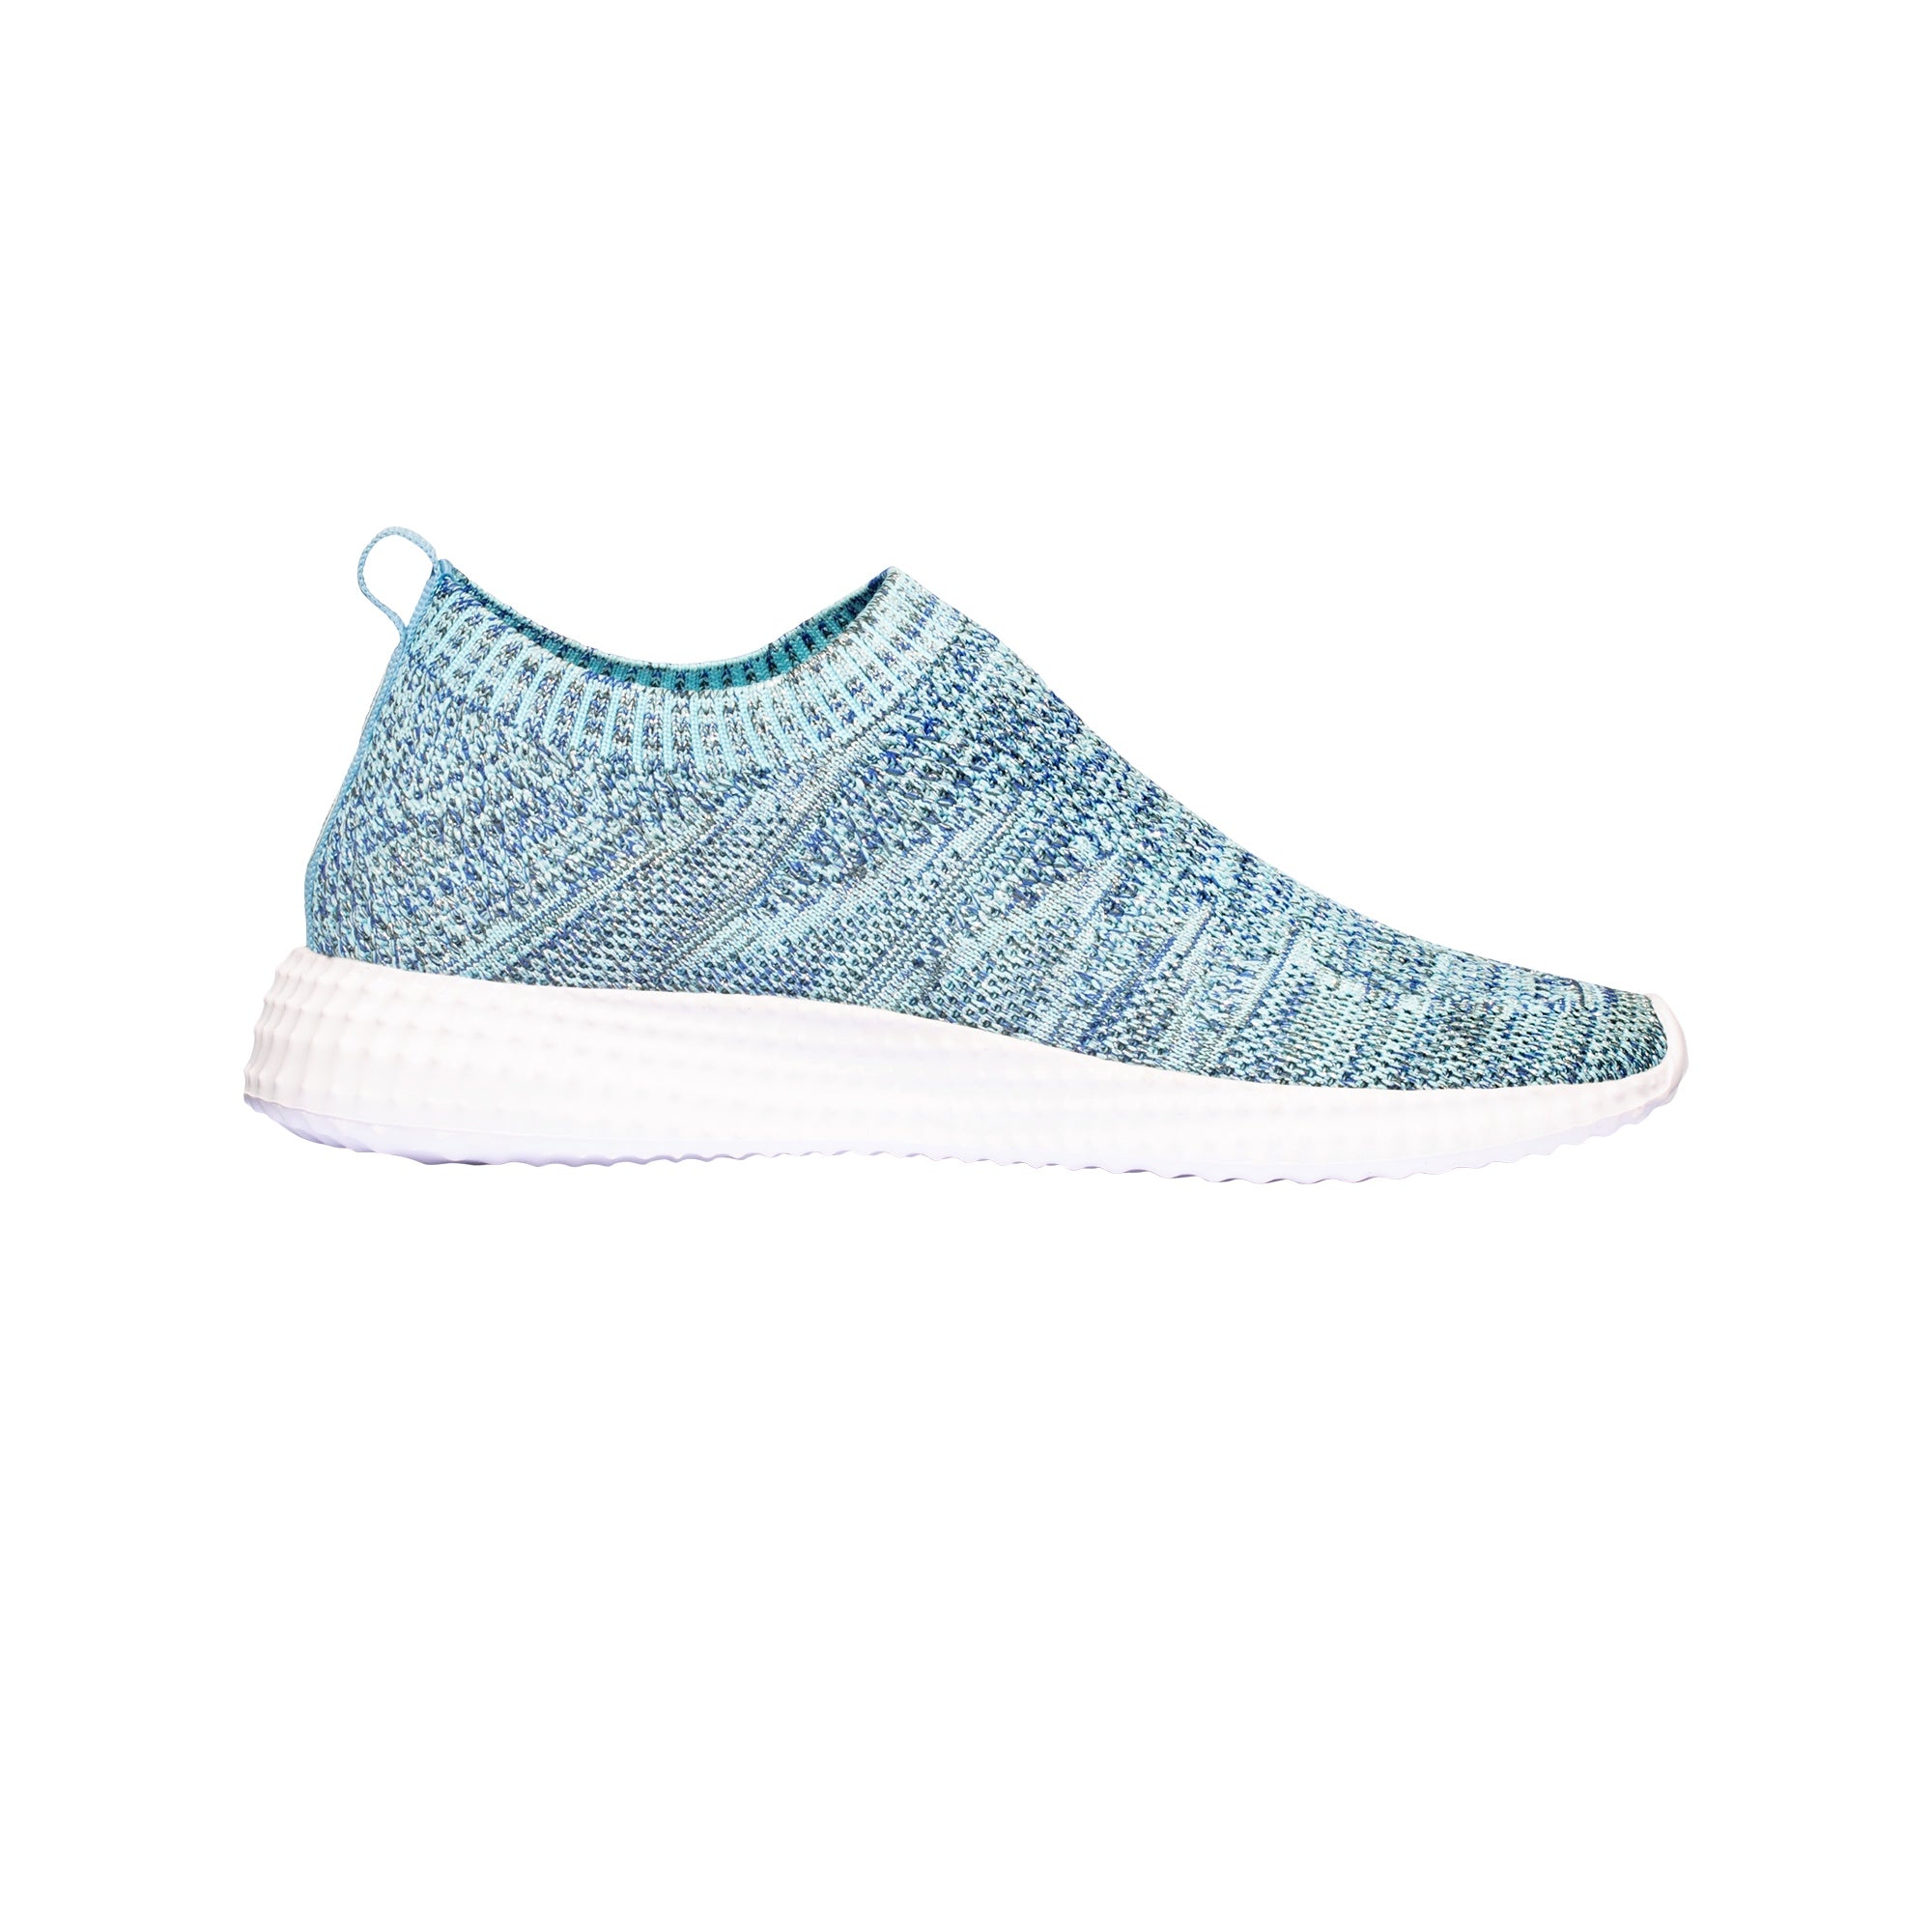 Schotel Laboratorium ondersteboven Sneakers Turquoise Free Style | Scholl Shoes